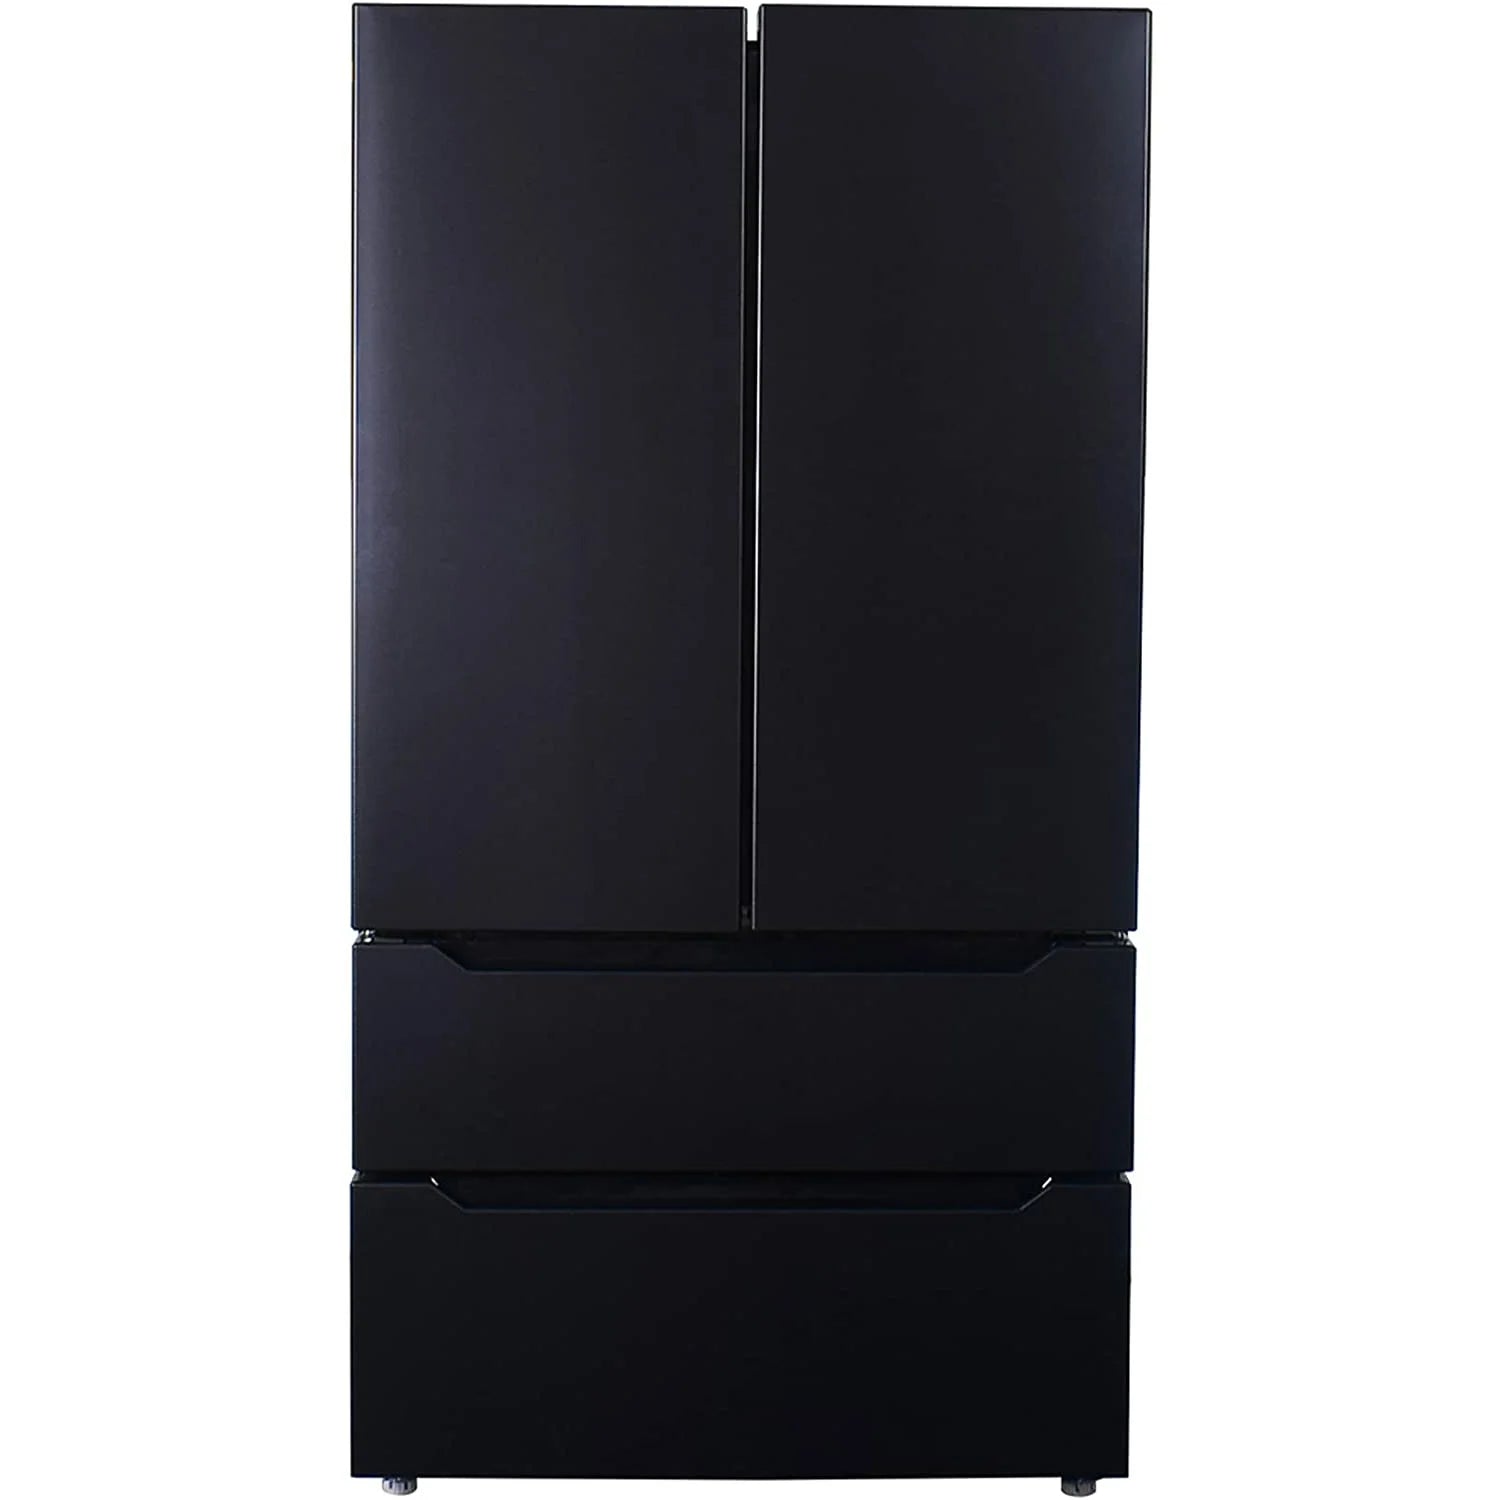 SMAD 22.5 cu.ft Counter Depth French Door Refrigerator  - front view black